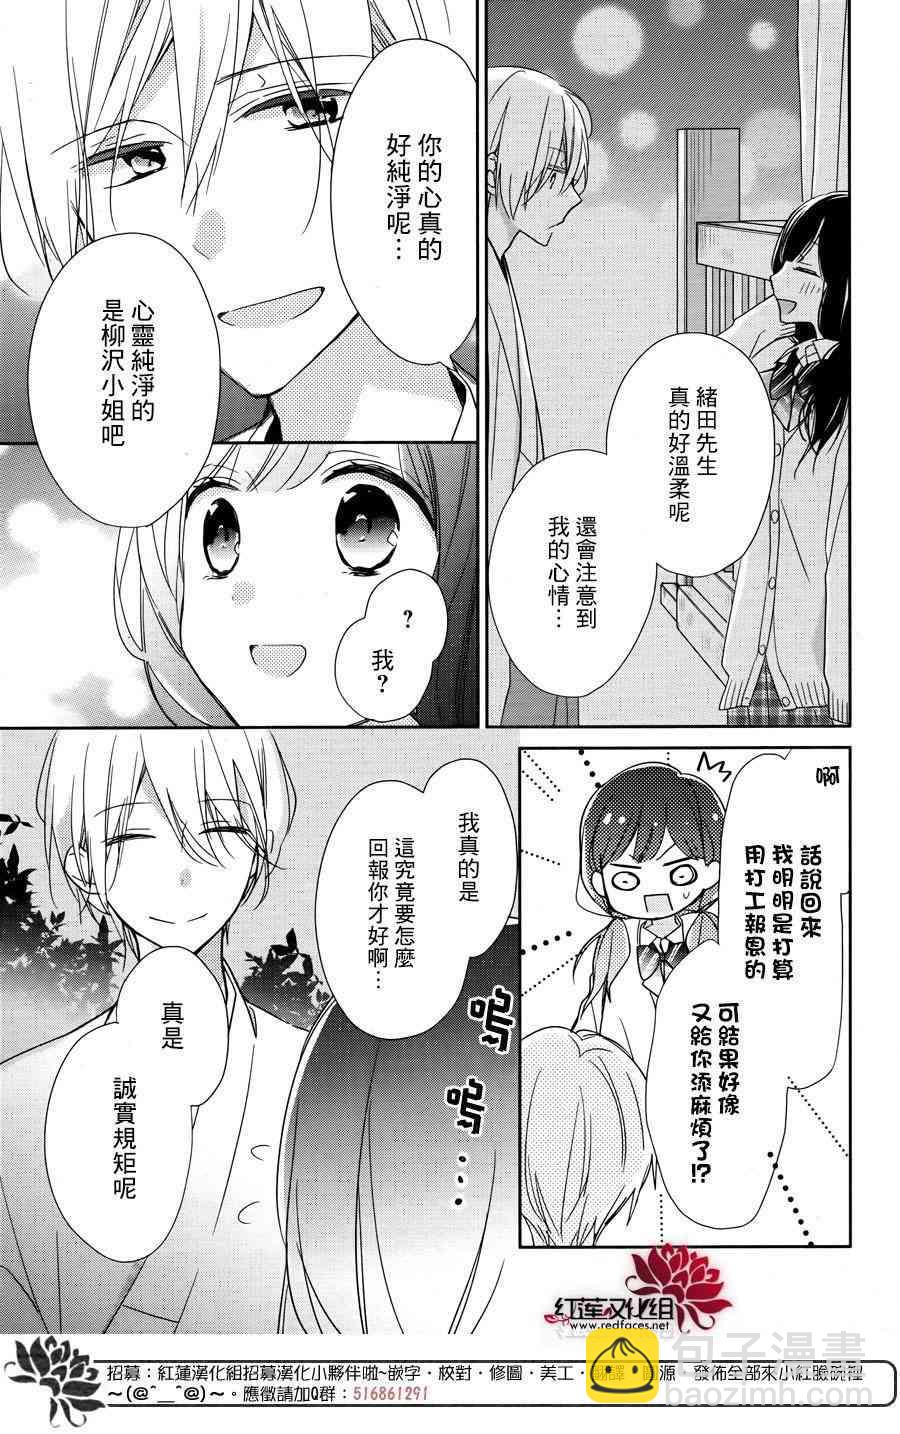 If given a second chance - 1話 - 6